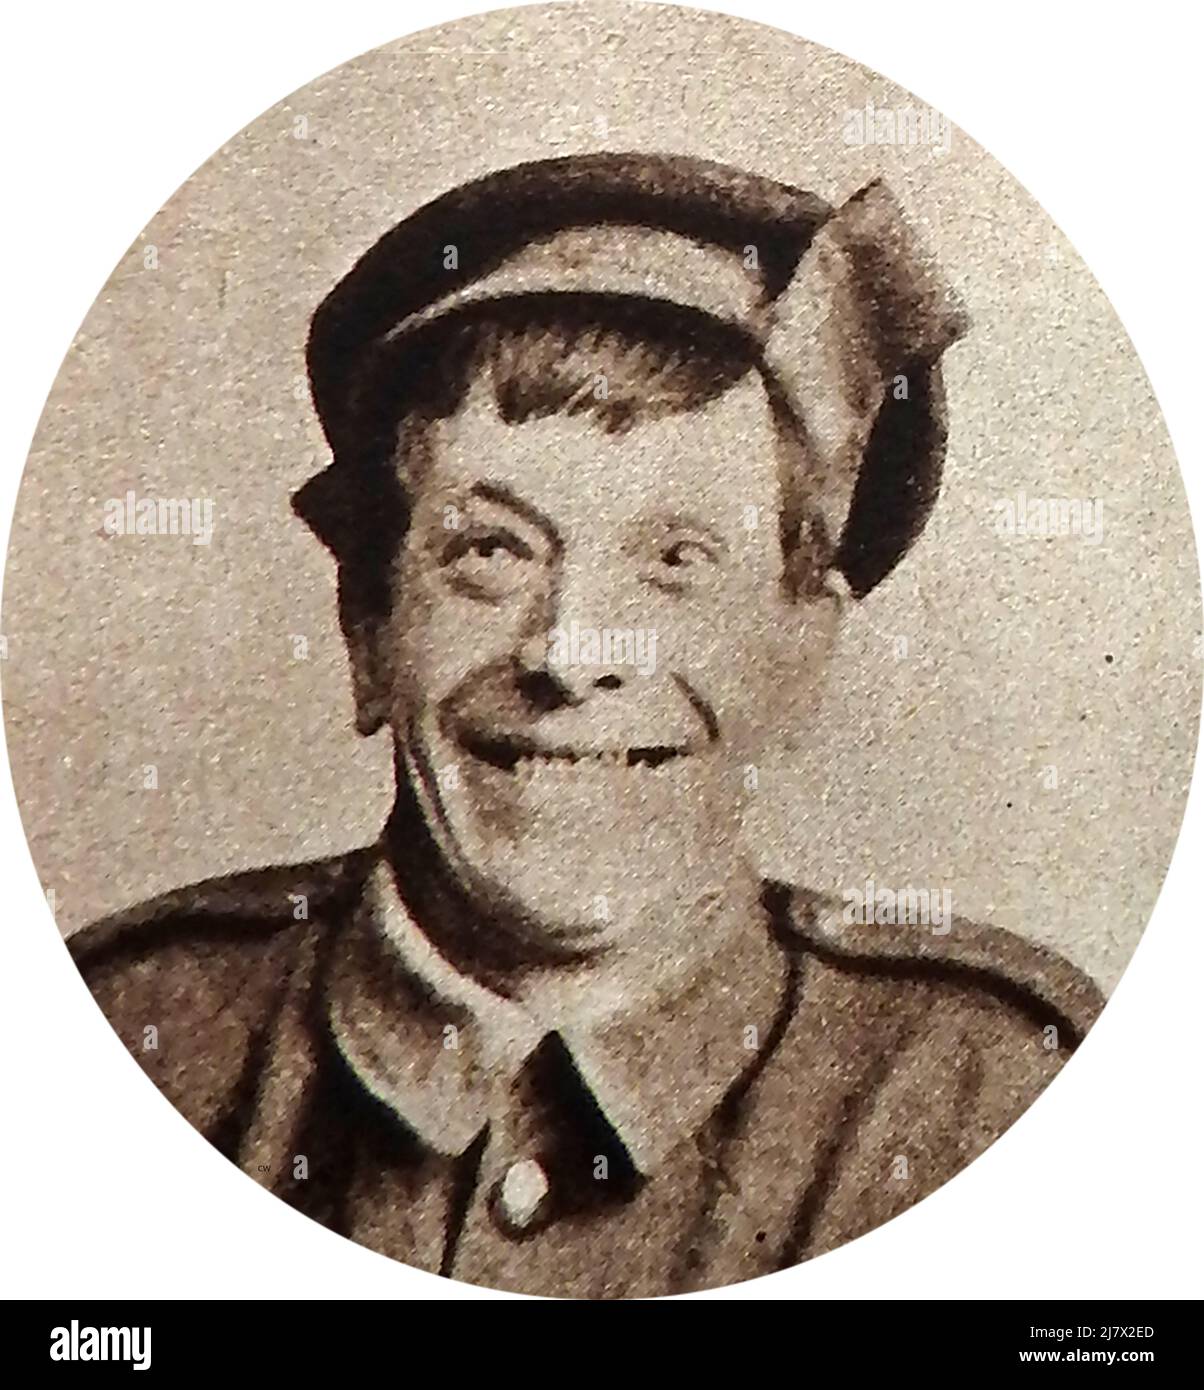 1917 portrait of actor Sinclair Cotter playing 'Alf' in 'Soldiers Three Stock Photo